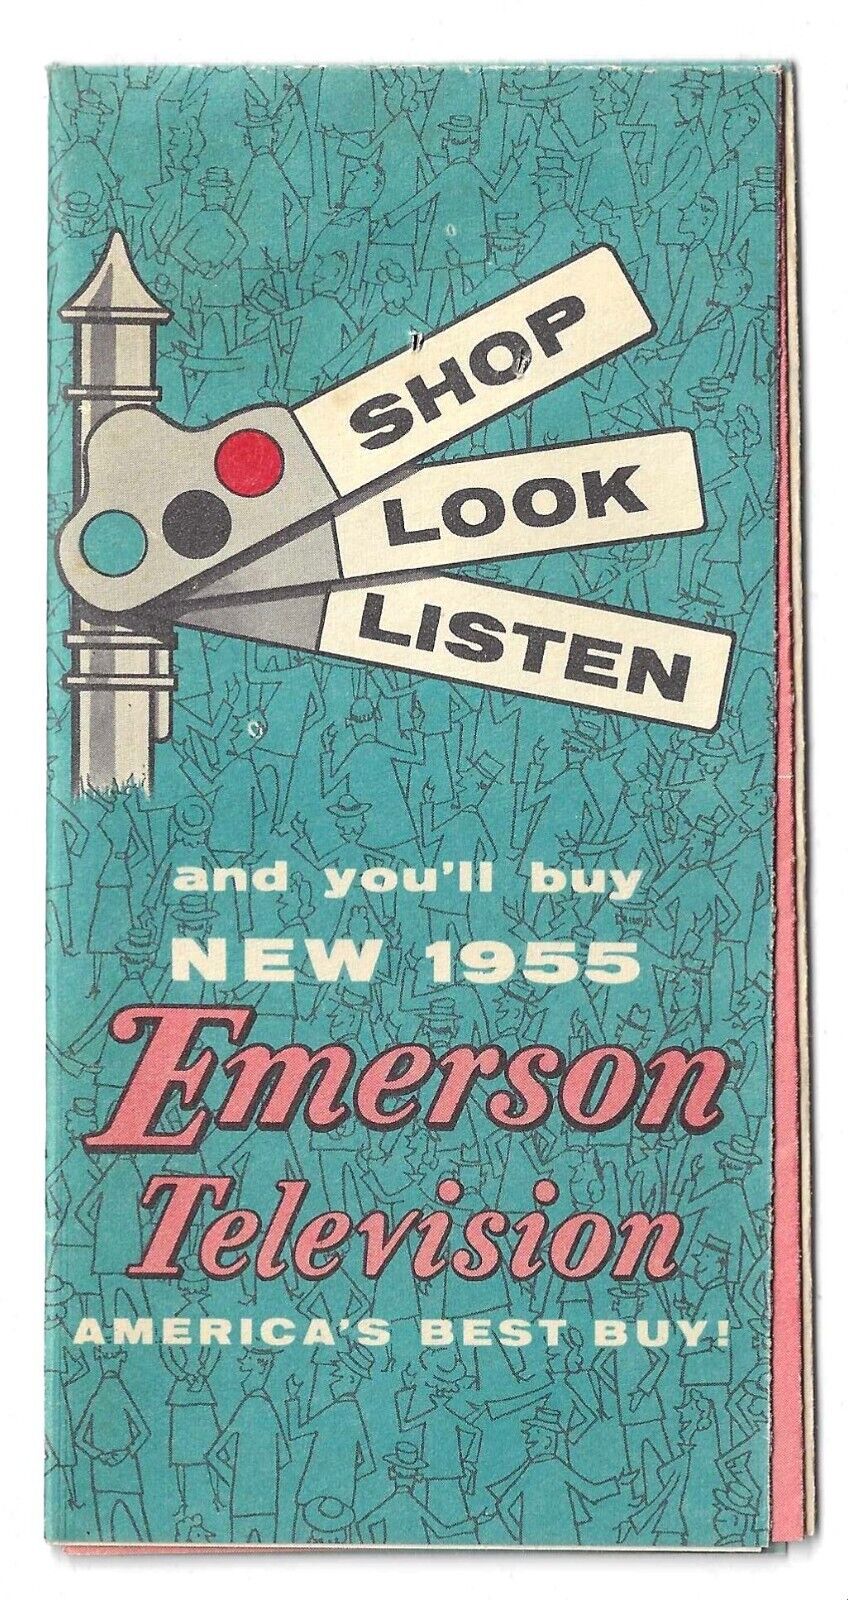 1955 Brochure on Emerson Televisions America\'s Best Buy